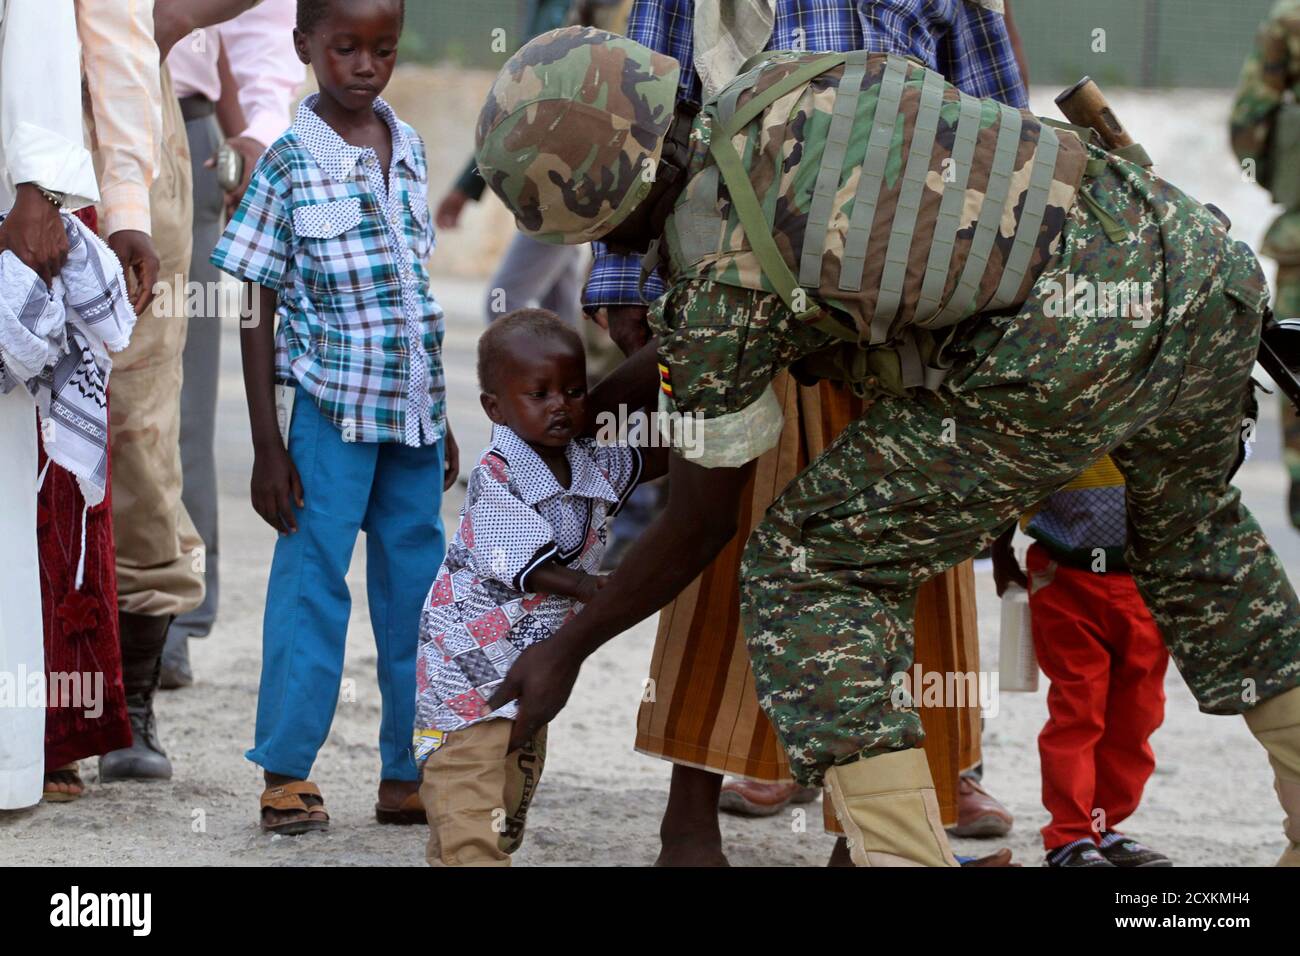 a-soldier-serving-in-the-african-union-mission-in-somalia-amisom-frisks-a-muslim-child-before-...jpg